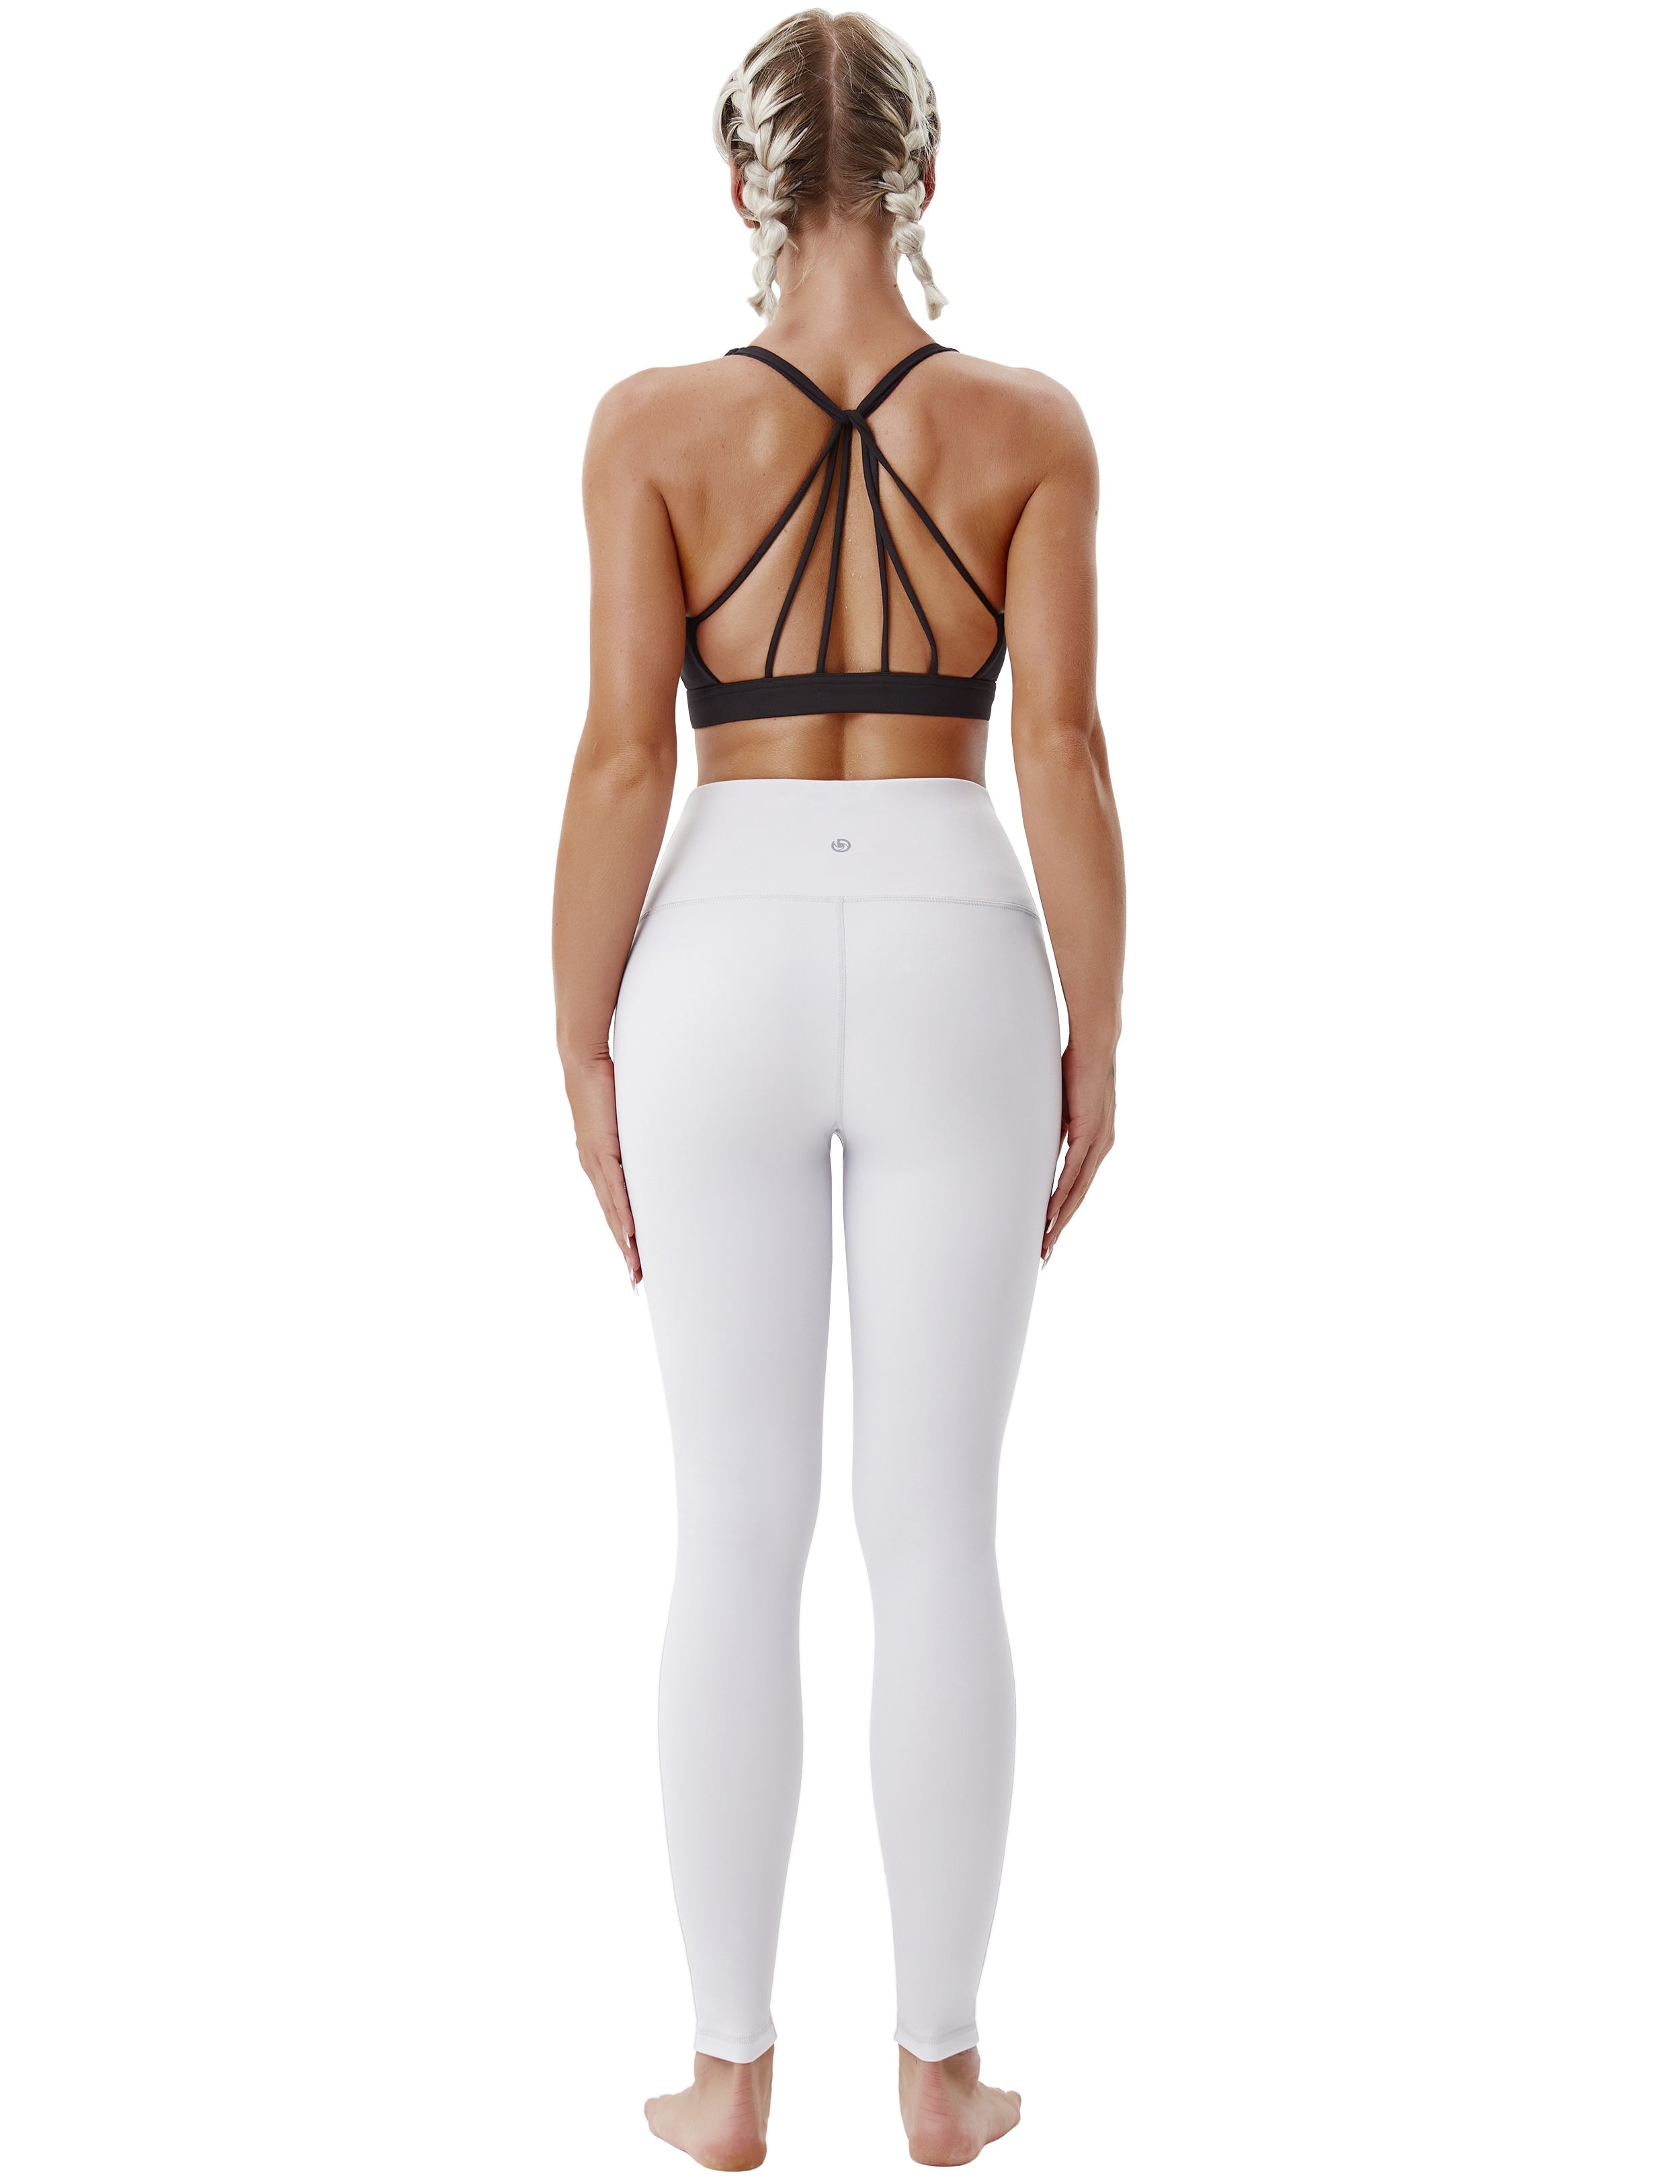 High Waist Side Line Pilates Pants lightgray Side Line is Make Your Legs Look Longer and Thinner 75%Nylon/25%Spandex Fabric doesn't attract lint easily 4-way stretch No see-through Moisture-wicking Tummy control Inner pocket Two lengths